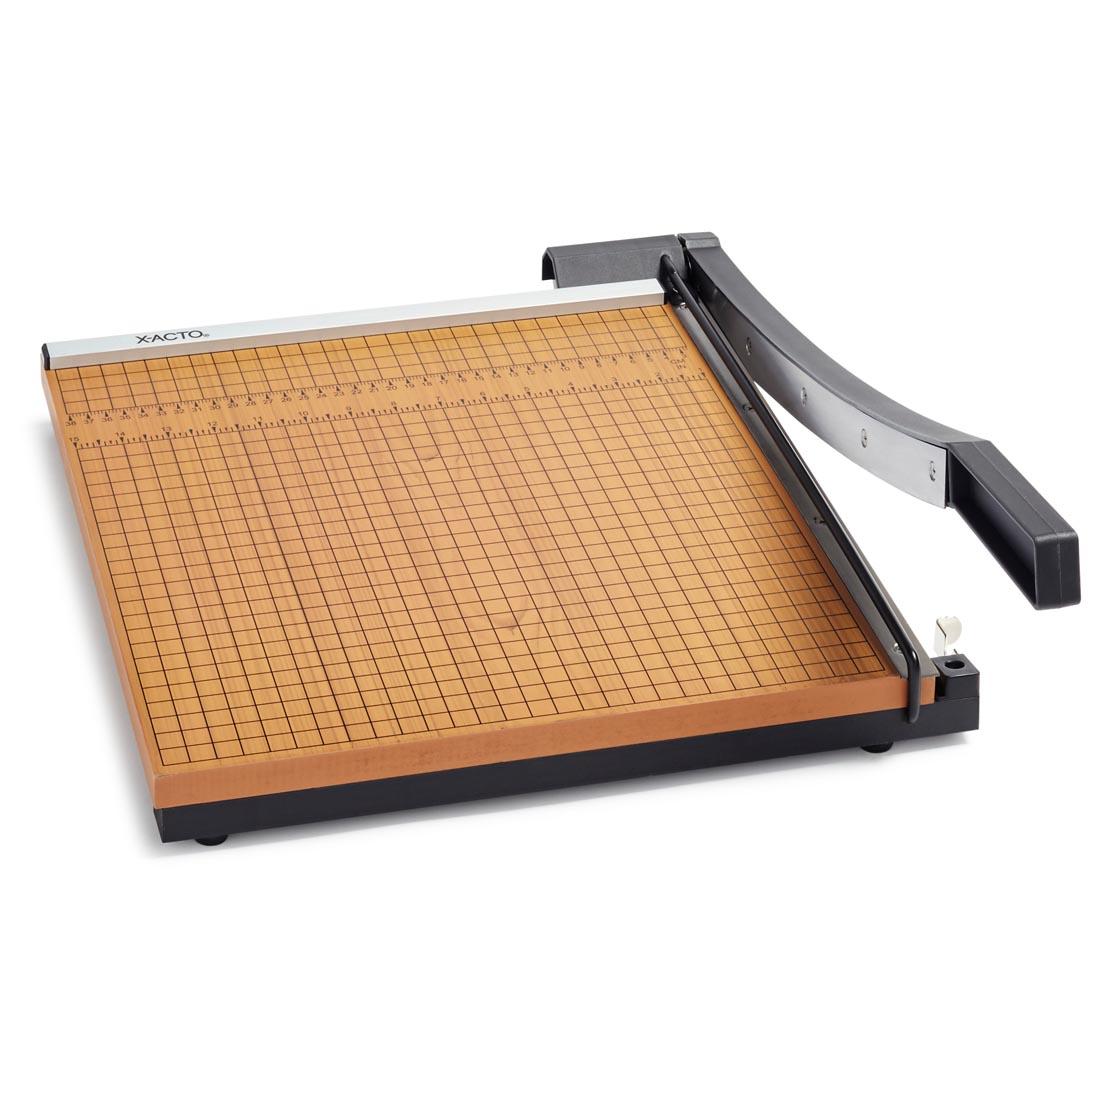 X-ACTO Square Wooden Trimmer